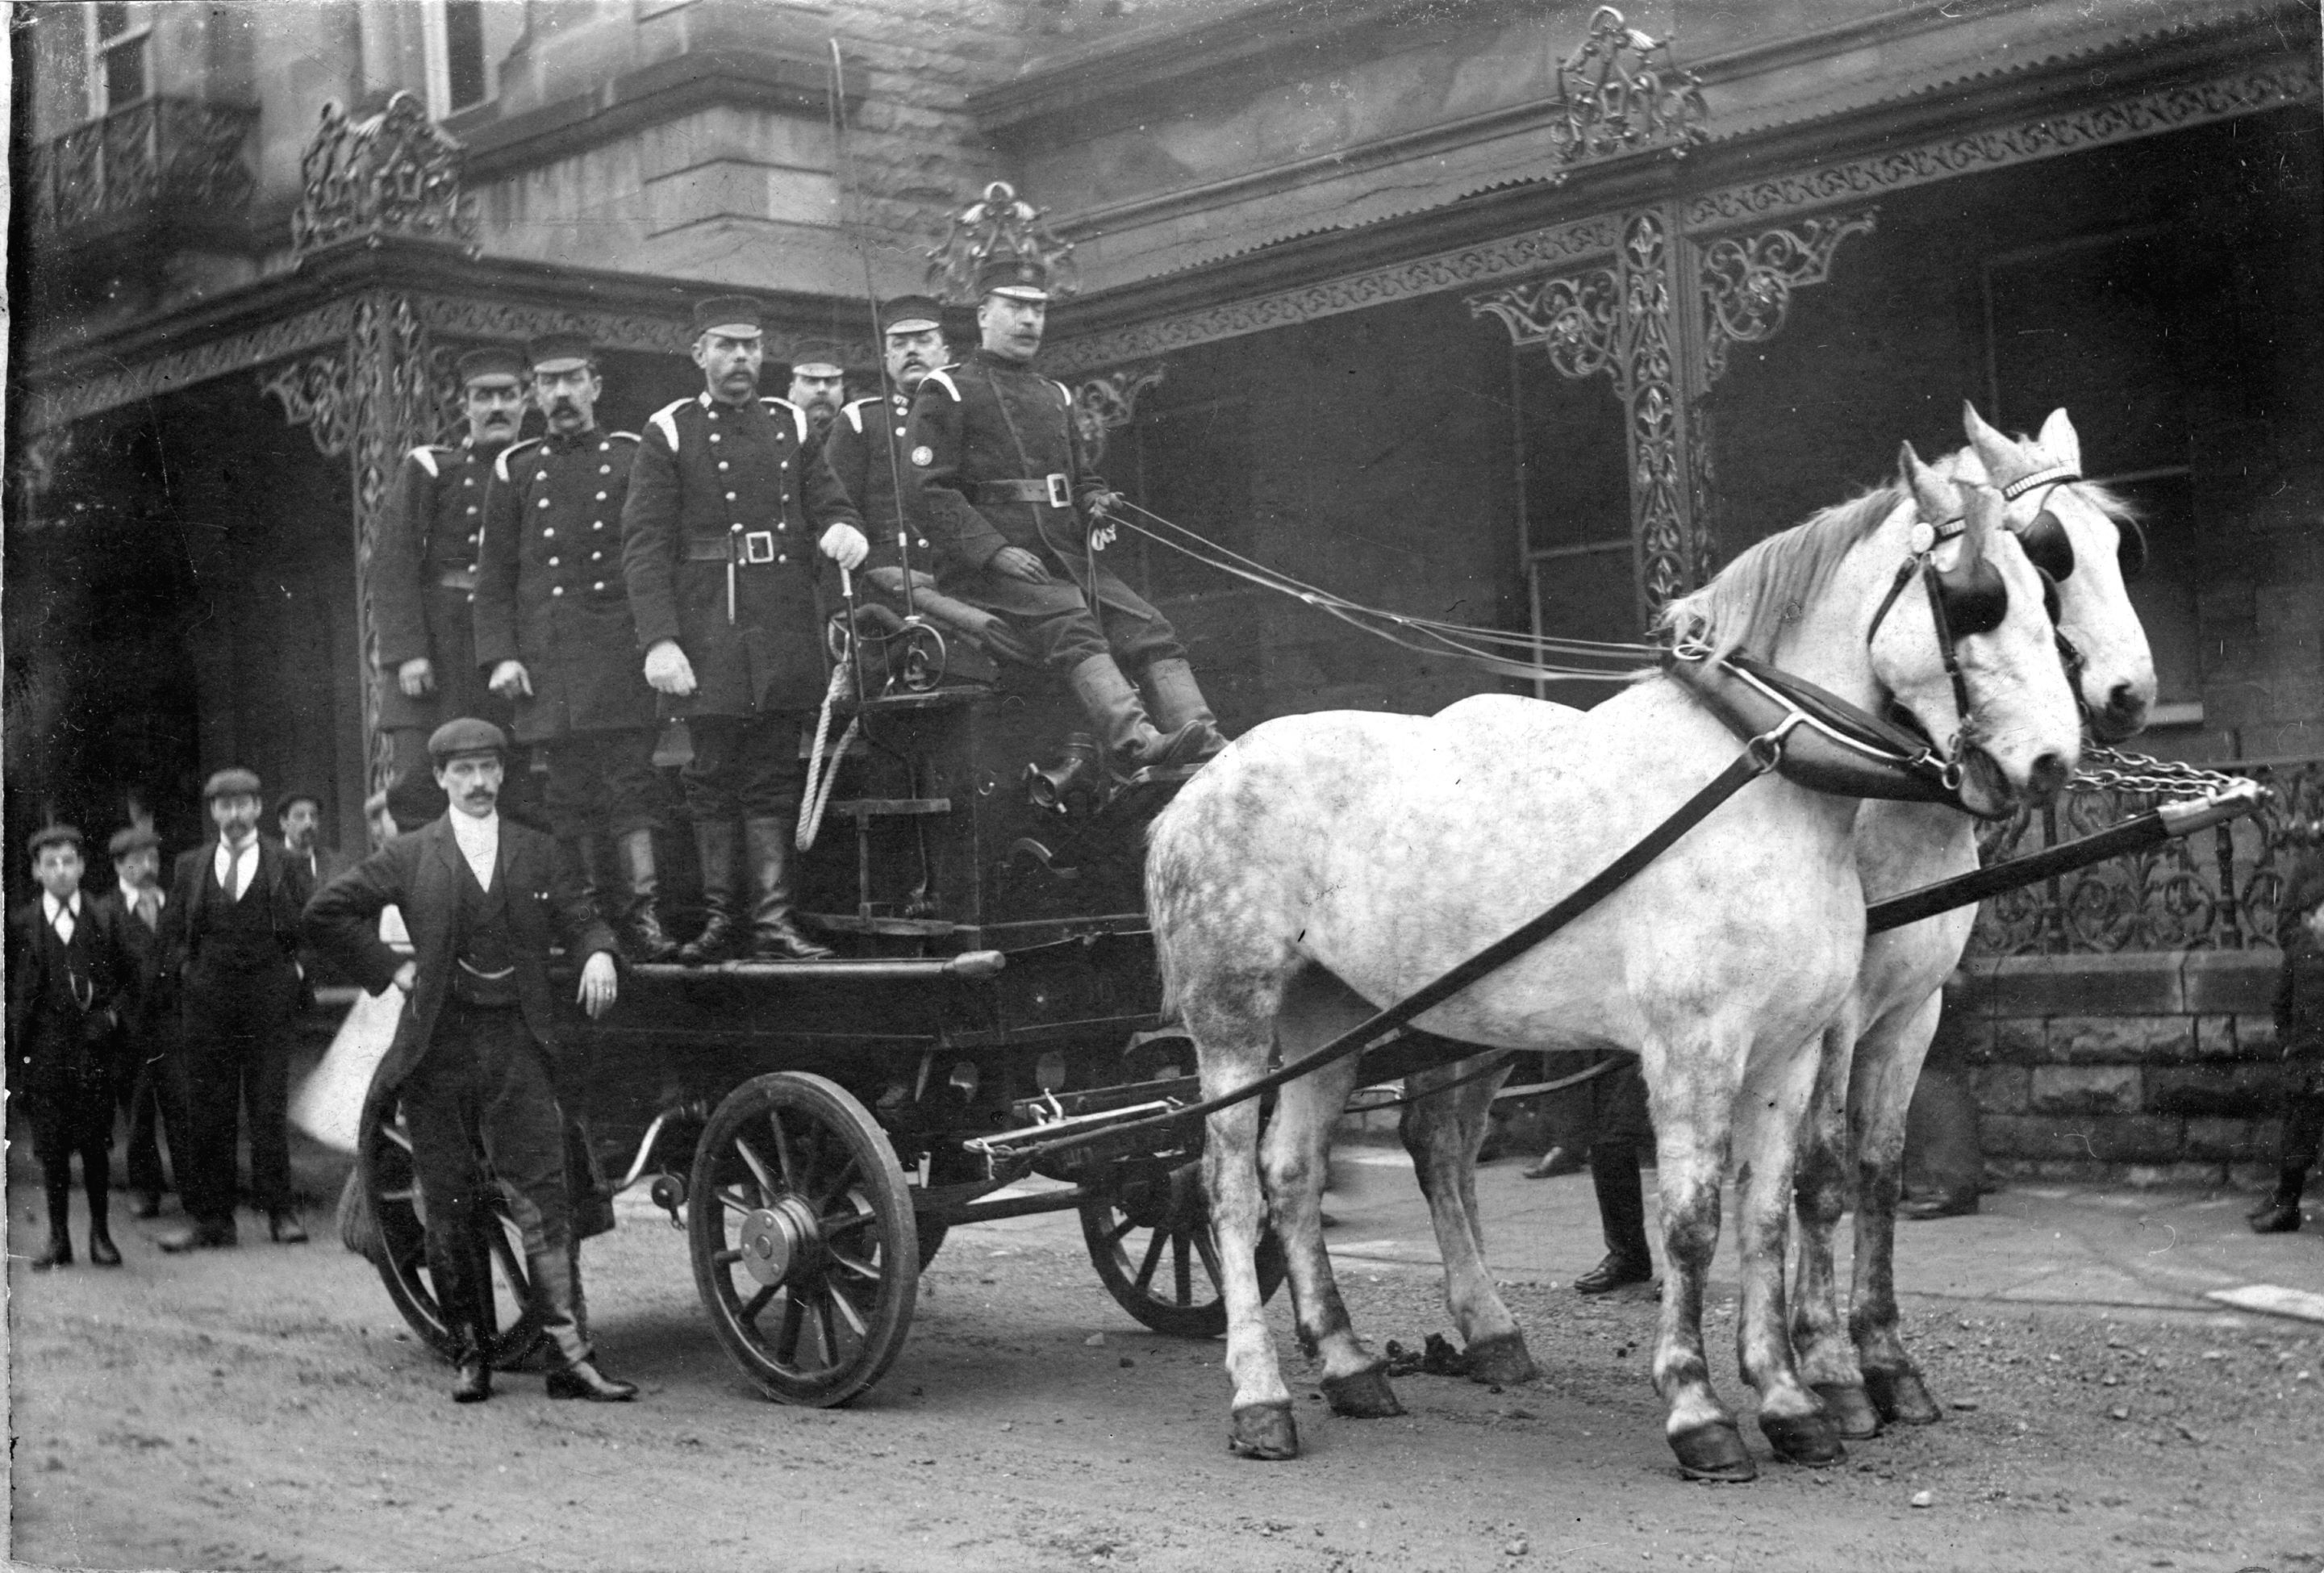 An early fire engine and crew outside Victoria Baths. Captain Allen is in charge of the crew.